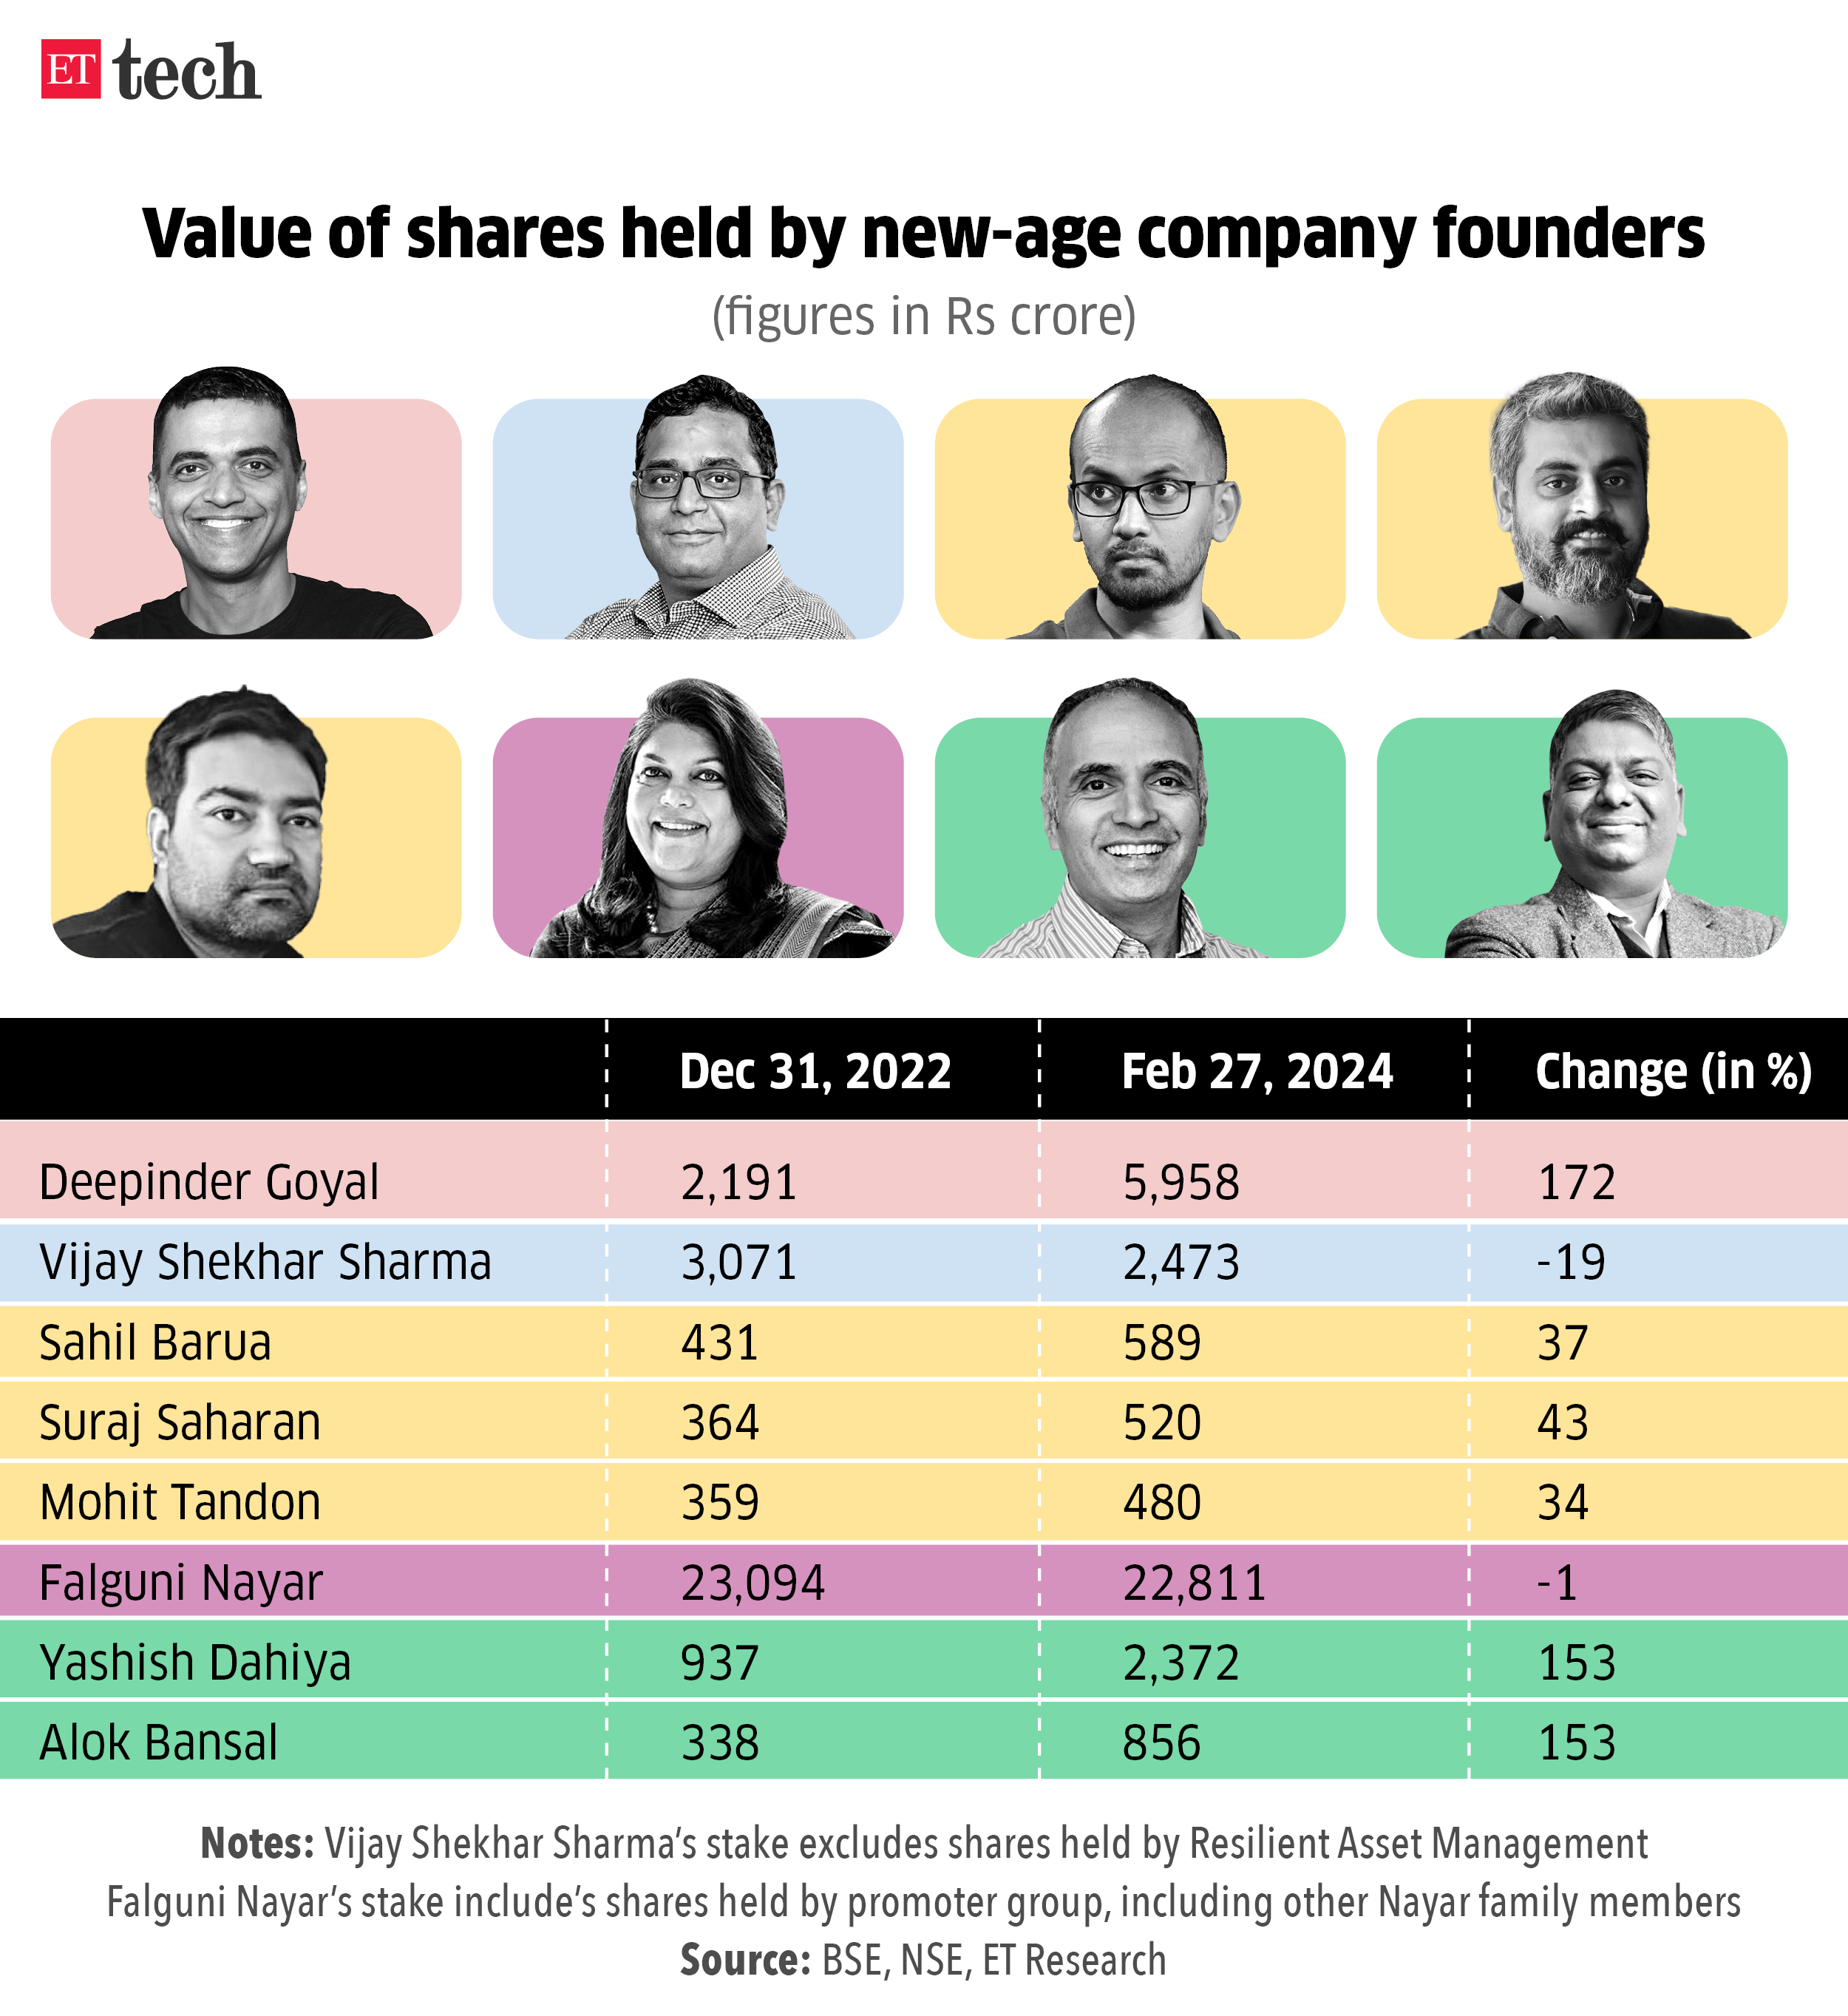 Value of shares held by new-age company founders_FEB 2024_Graphic_ETTECH_1